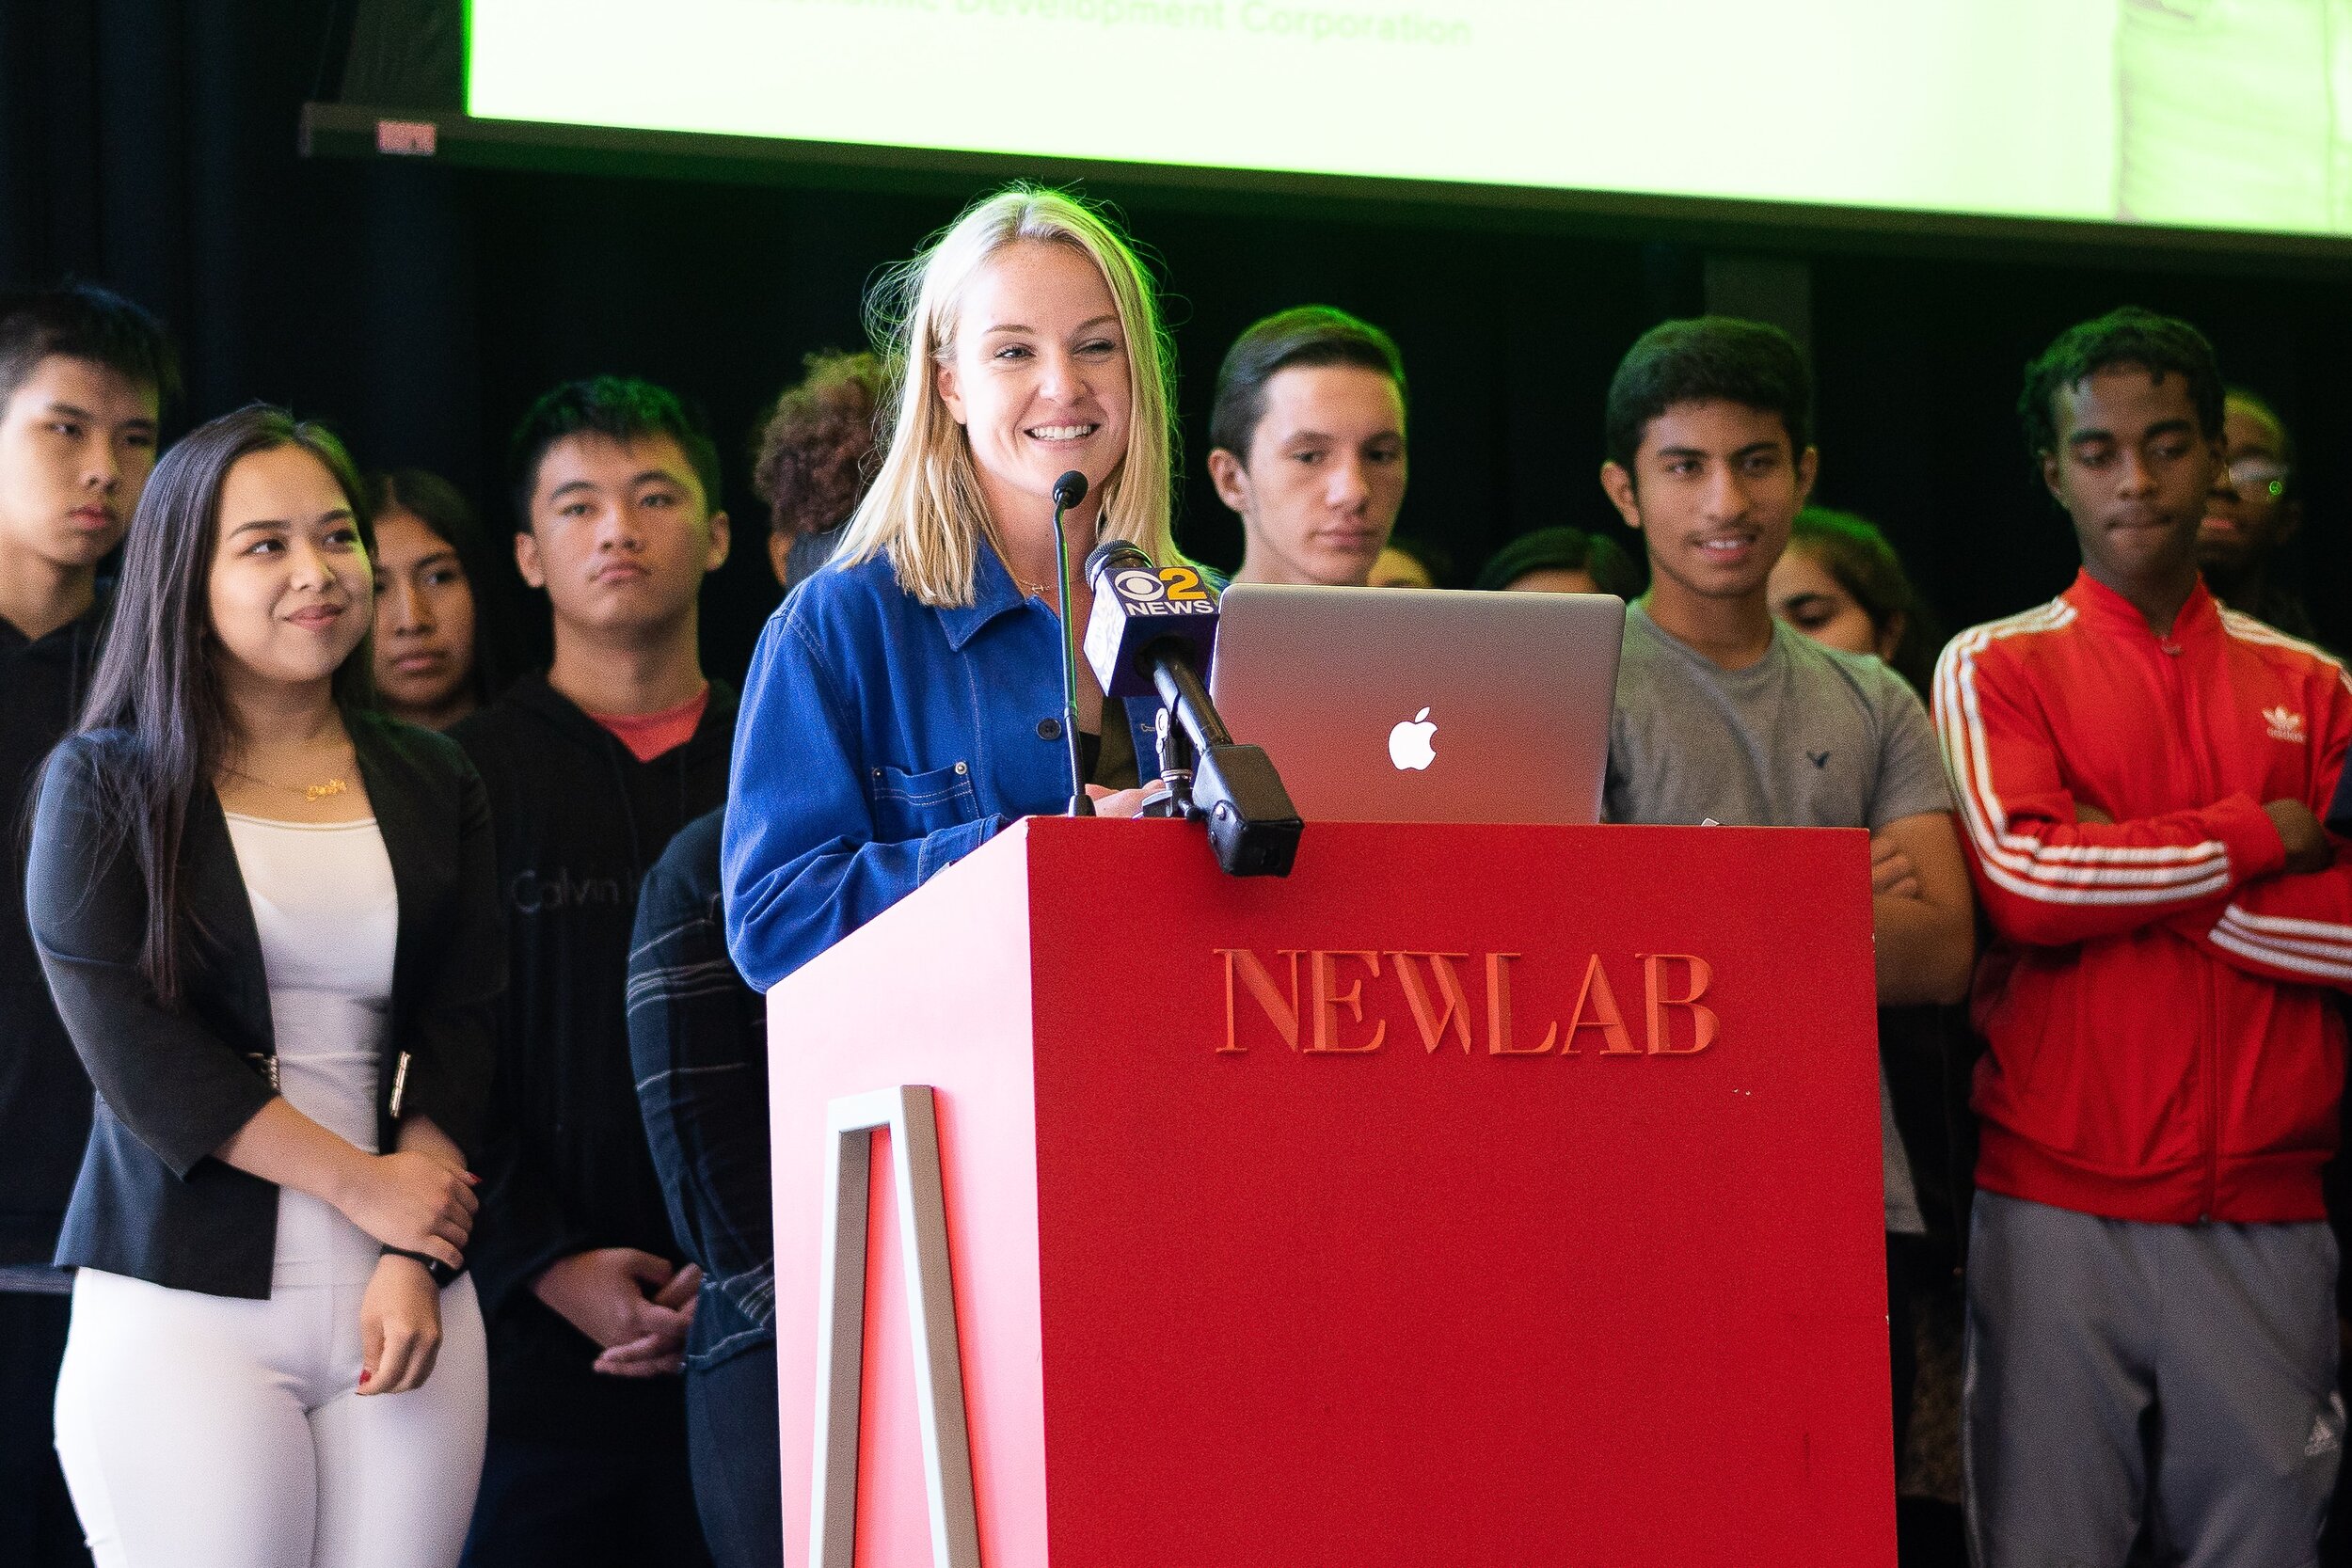   Briana Ryan, New Lab's Education Program Manager speaks at the launch event for HE3AT, the new STEAM-focused education program for Brooklyn South high school students.&nbsp;  